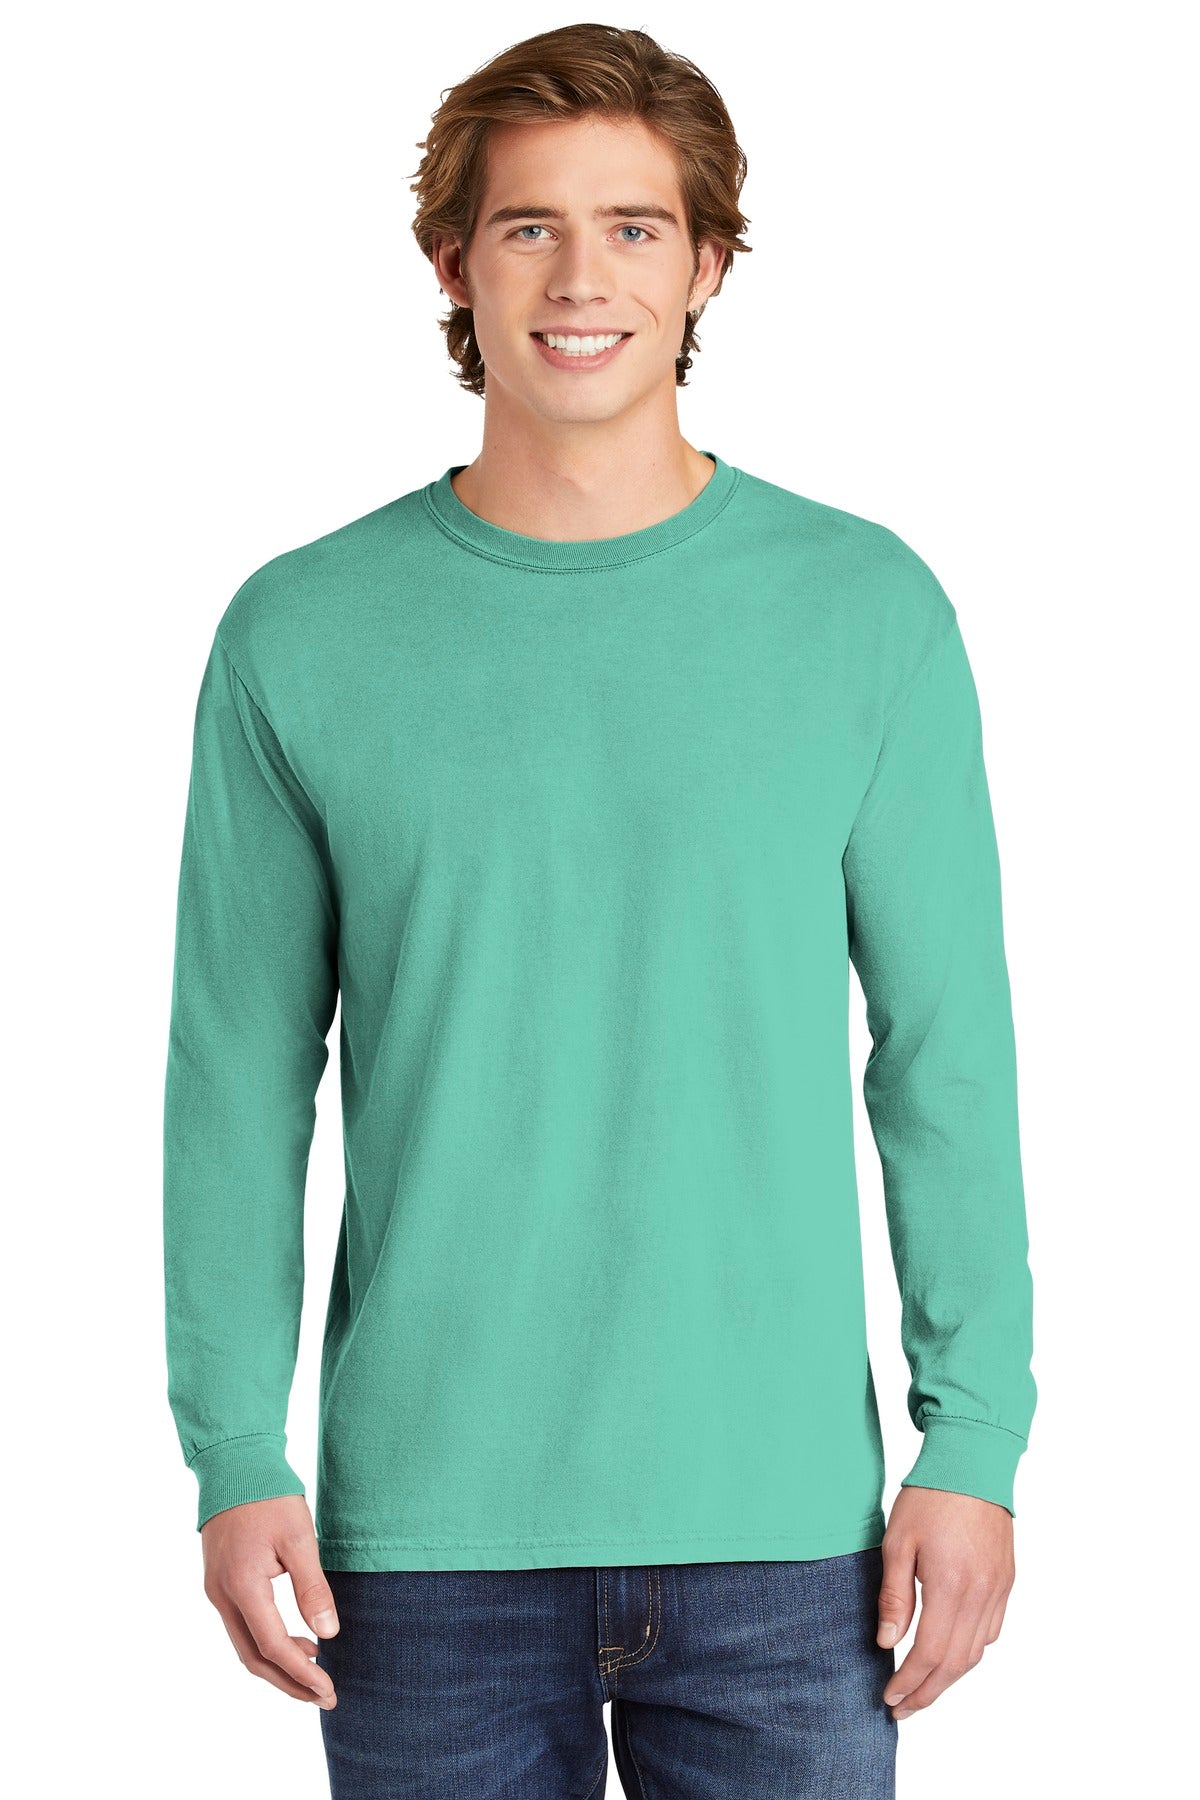 T-Shirts Chalky Mint Comfort Colors